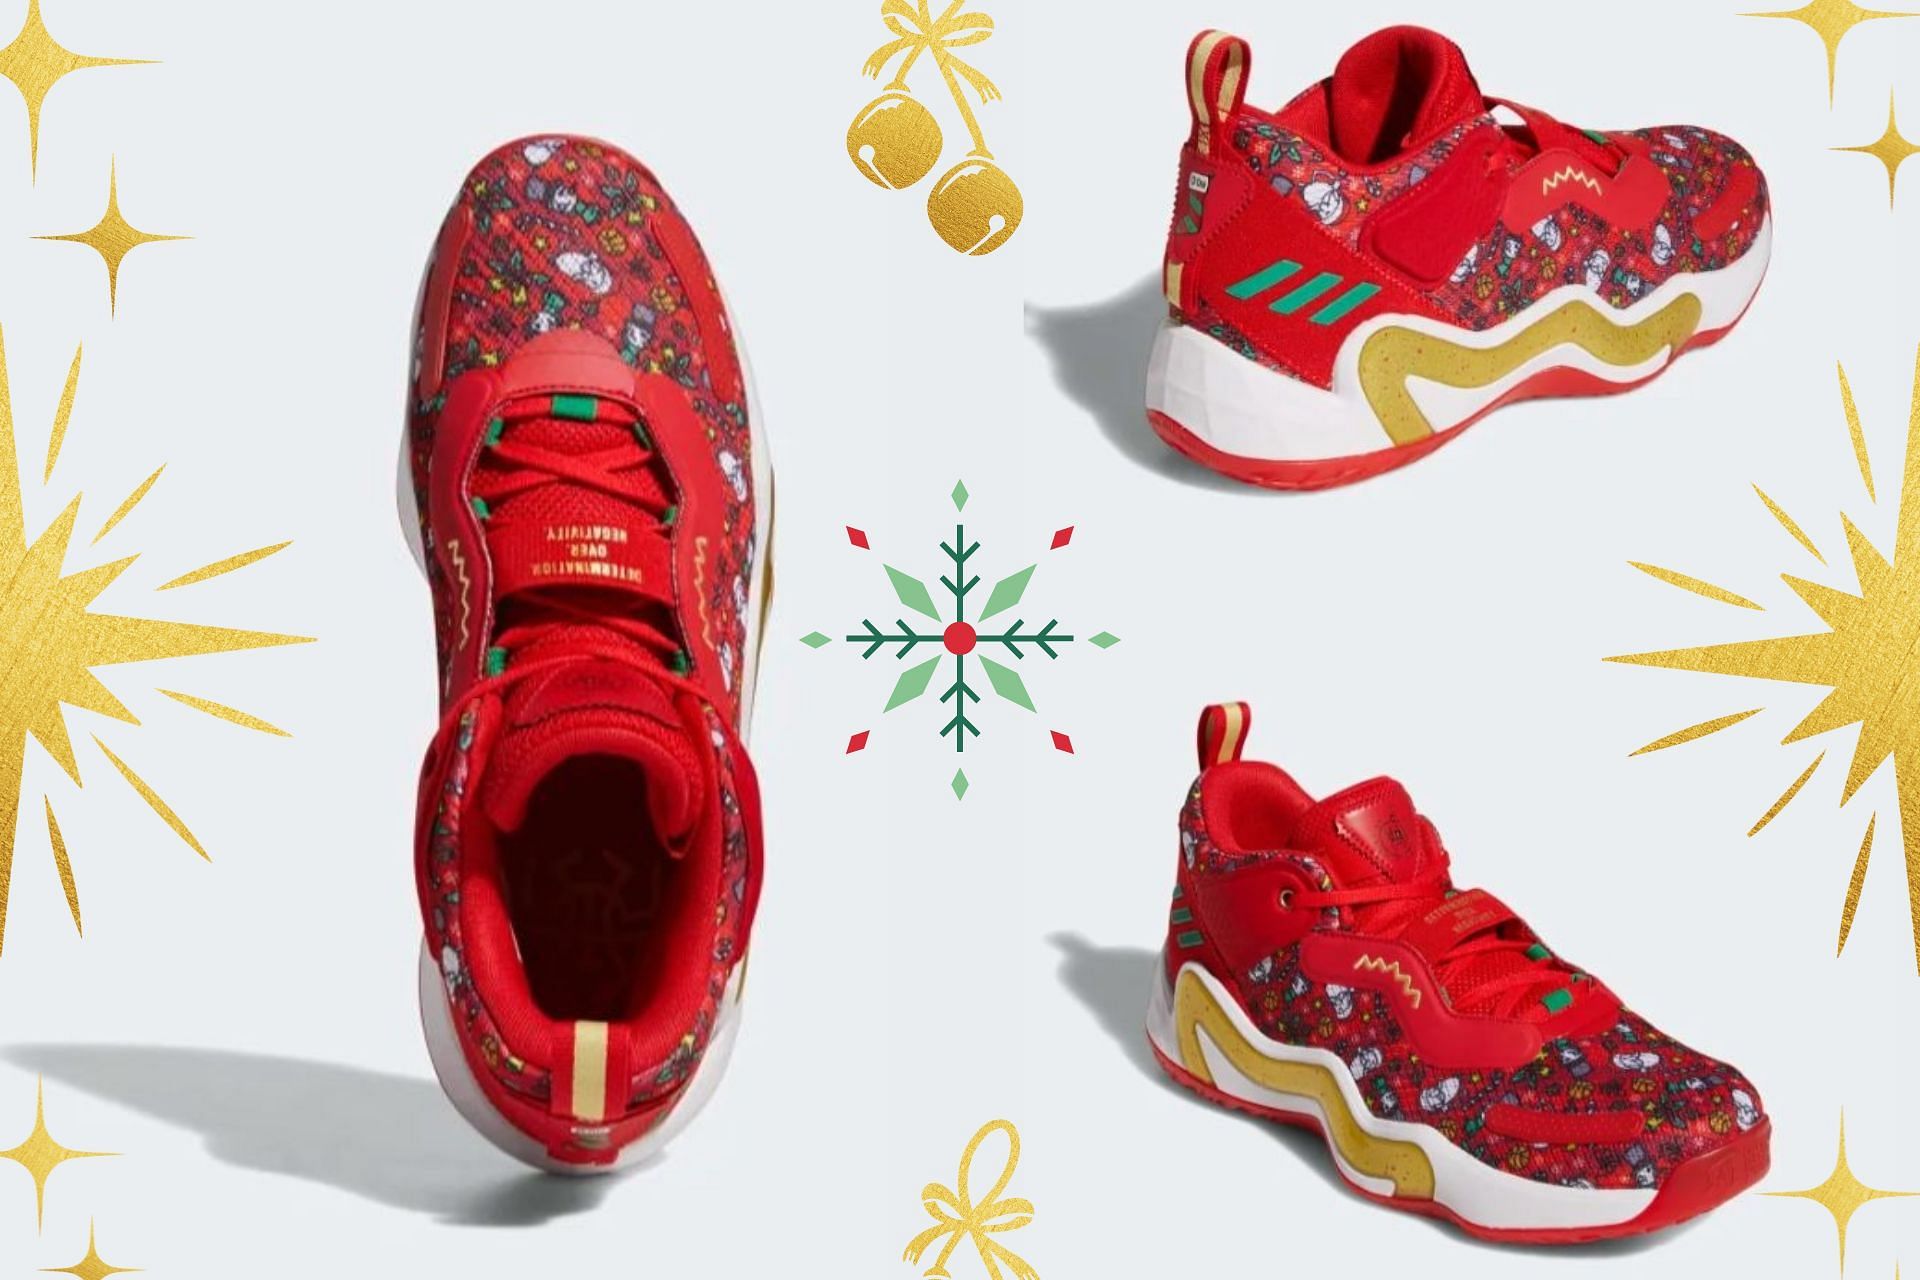 Here&#039;s a detailed look at the D.O.N. #Issue 3 Christmas shoes (Image via Sportskeeda)